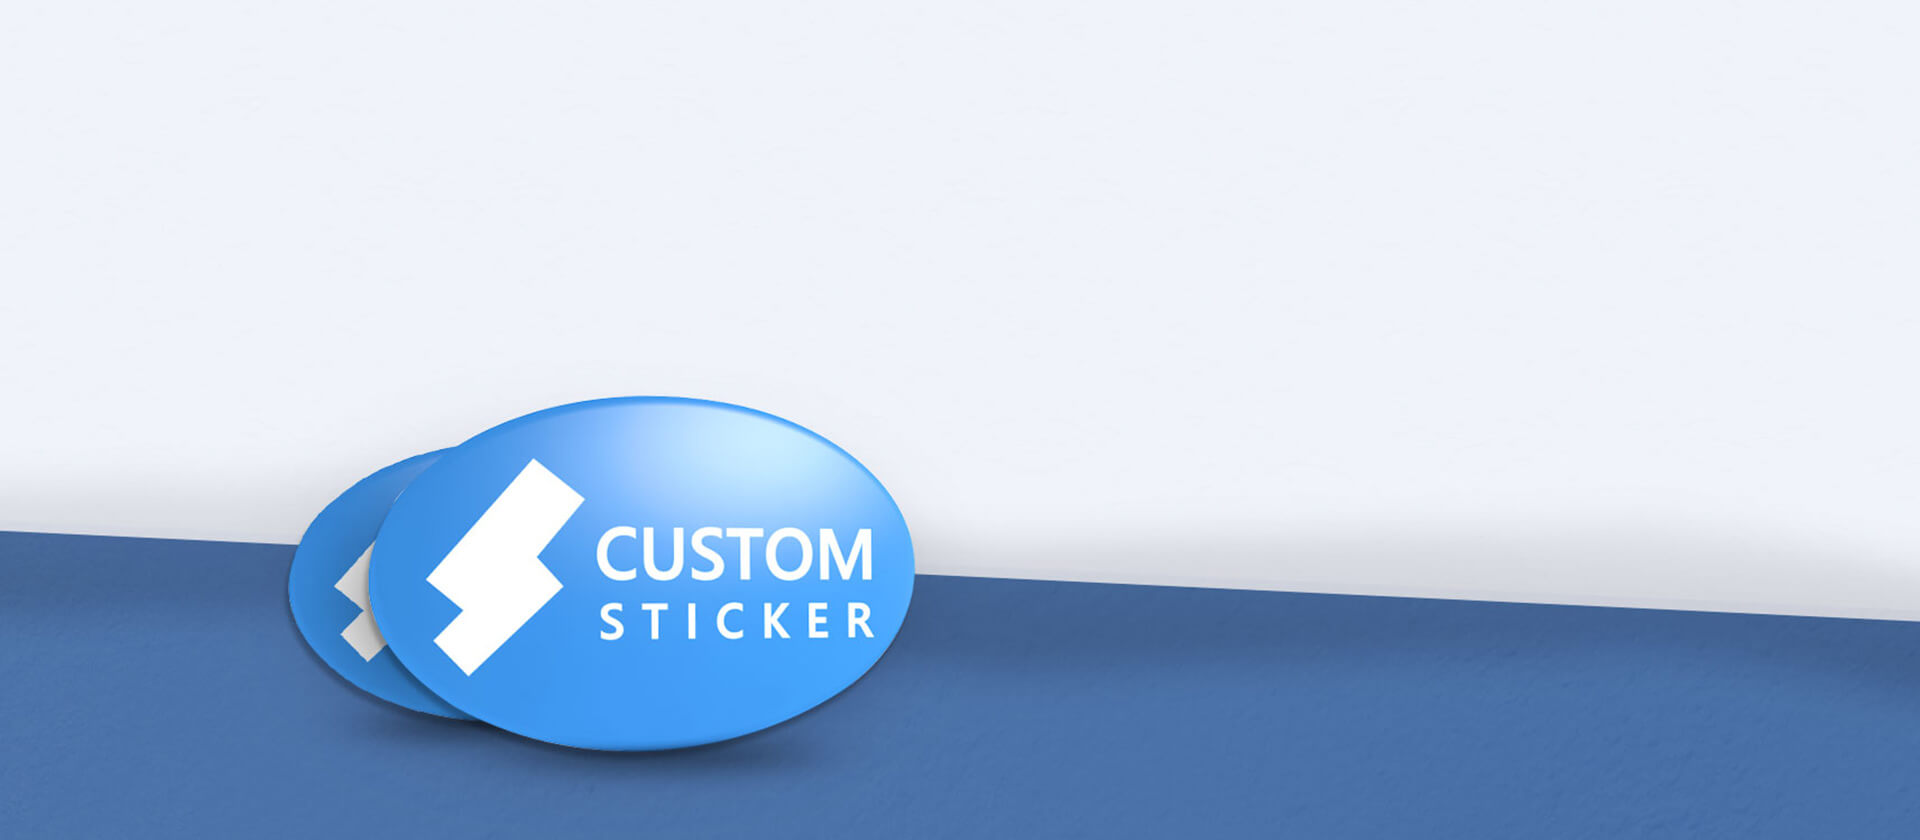 custom oval buttons banner